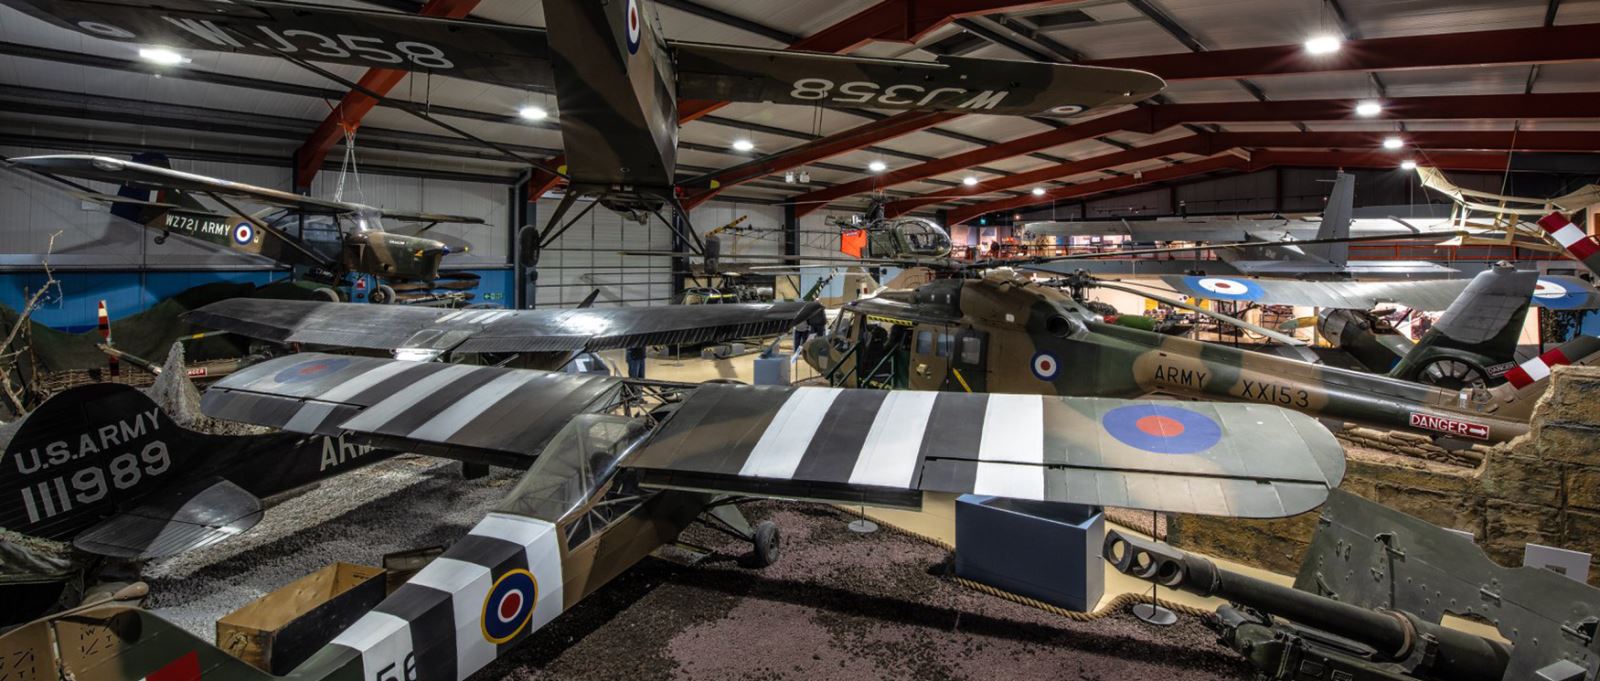 Army Flying Museum, Hampshire